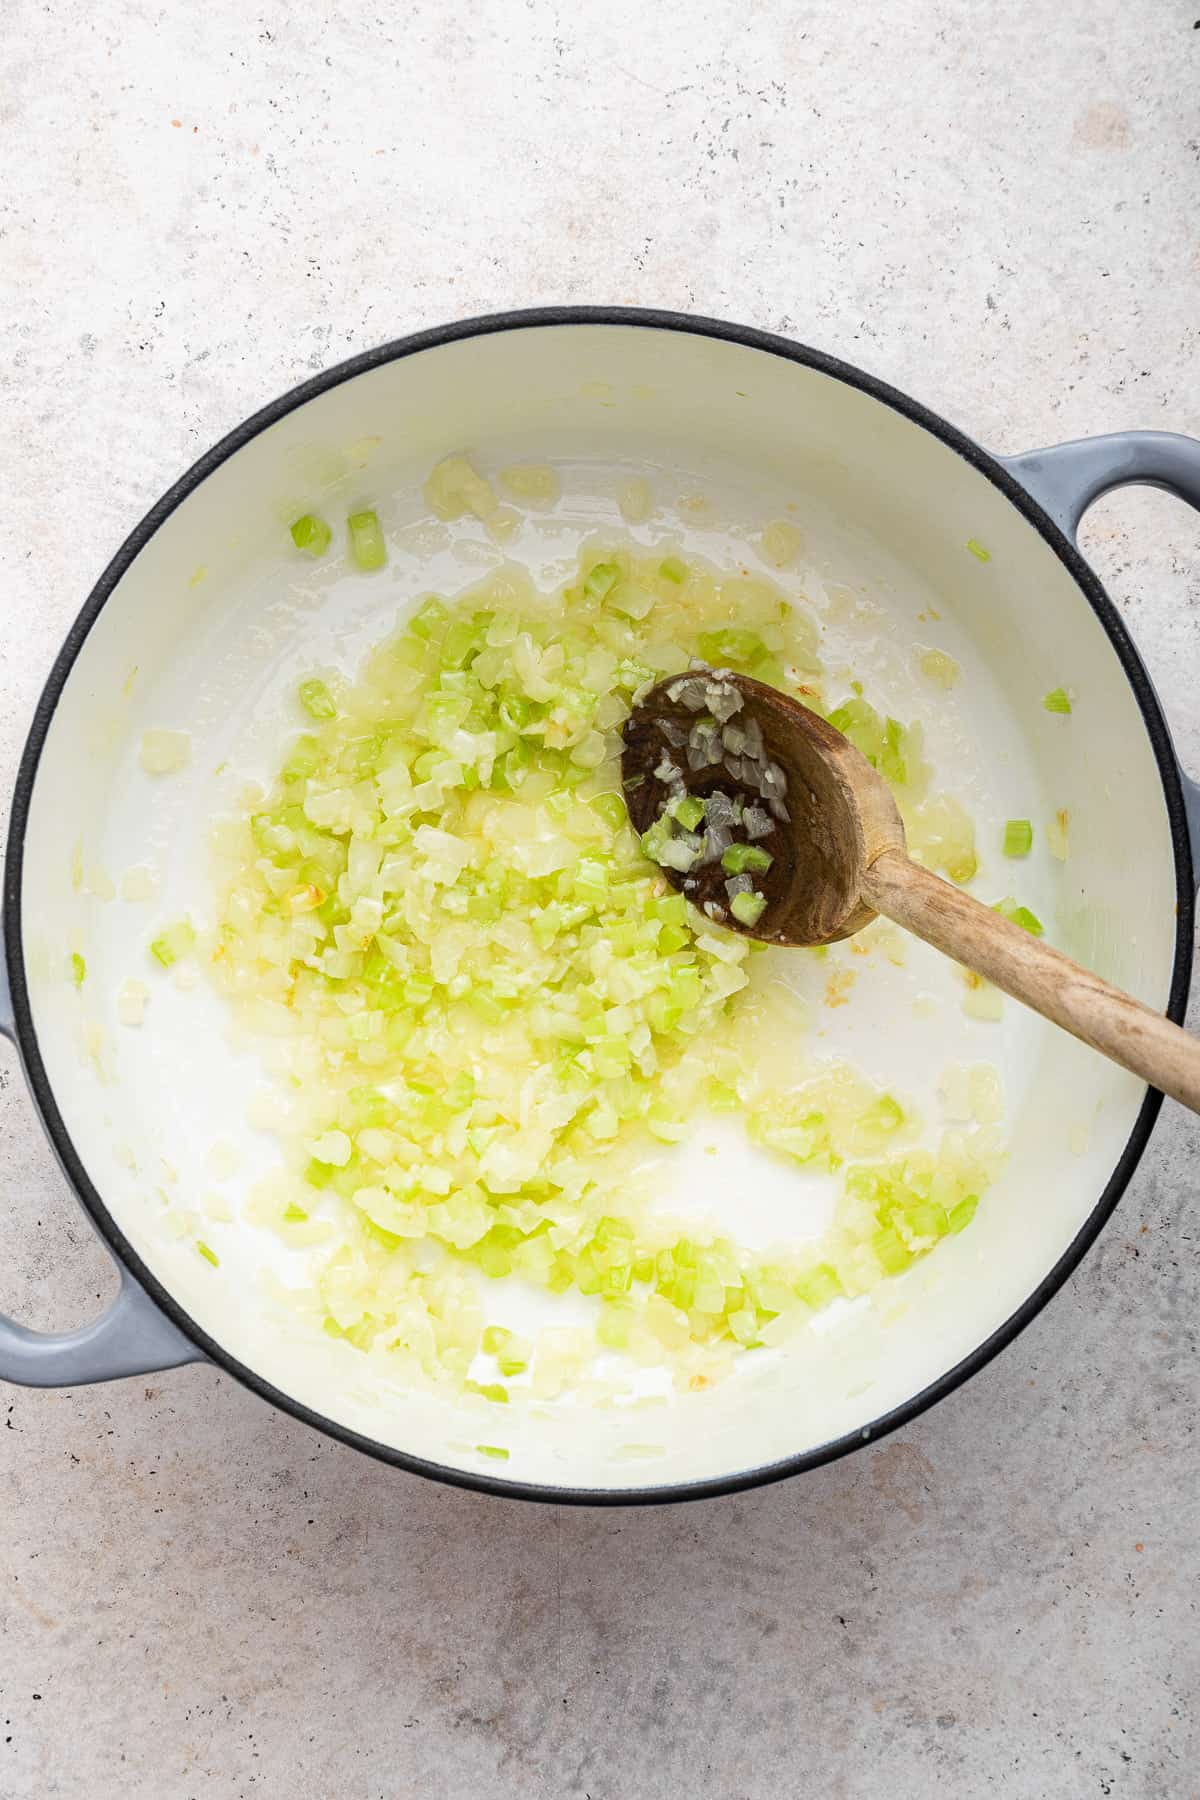 Sauteeing the celery, garlic, and onions in a large pot with a wooden spoon,